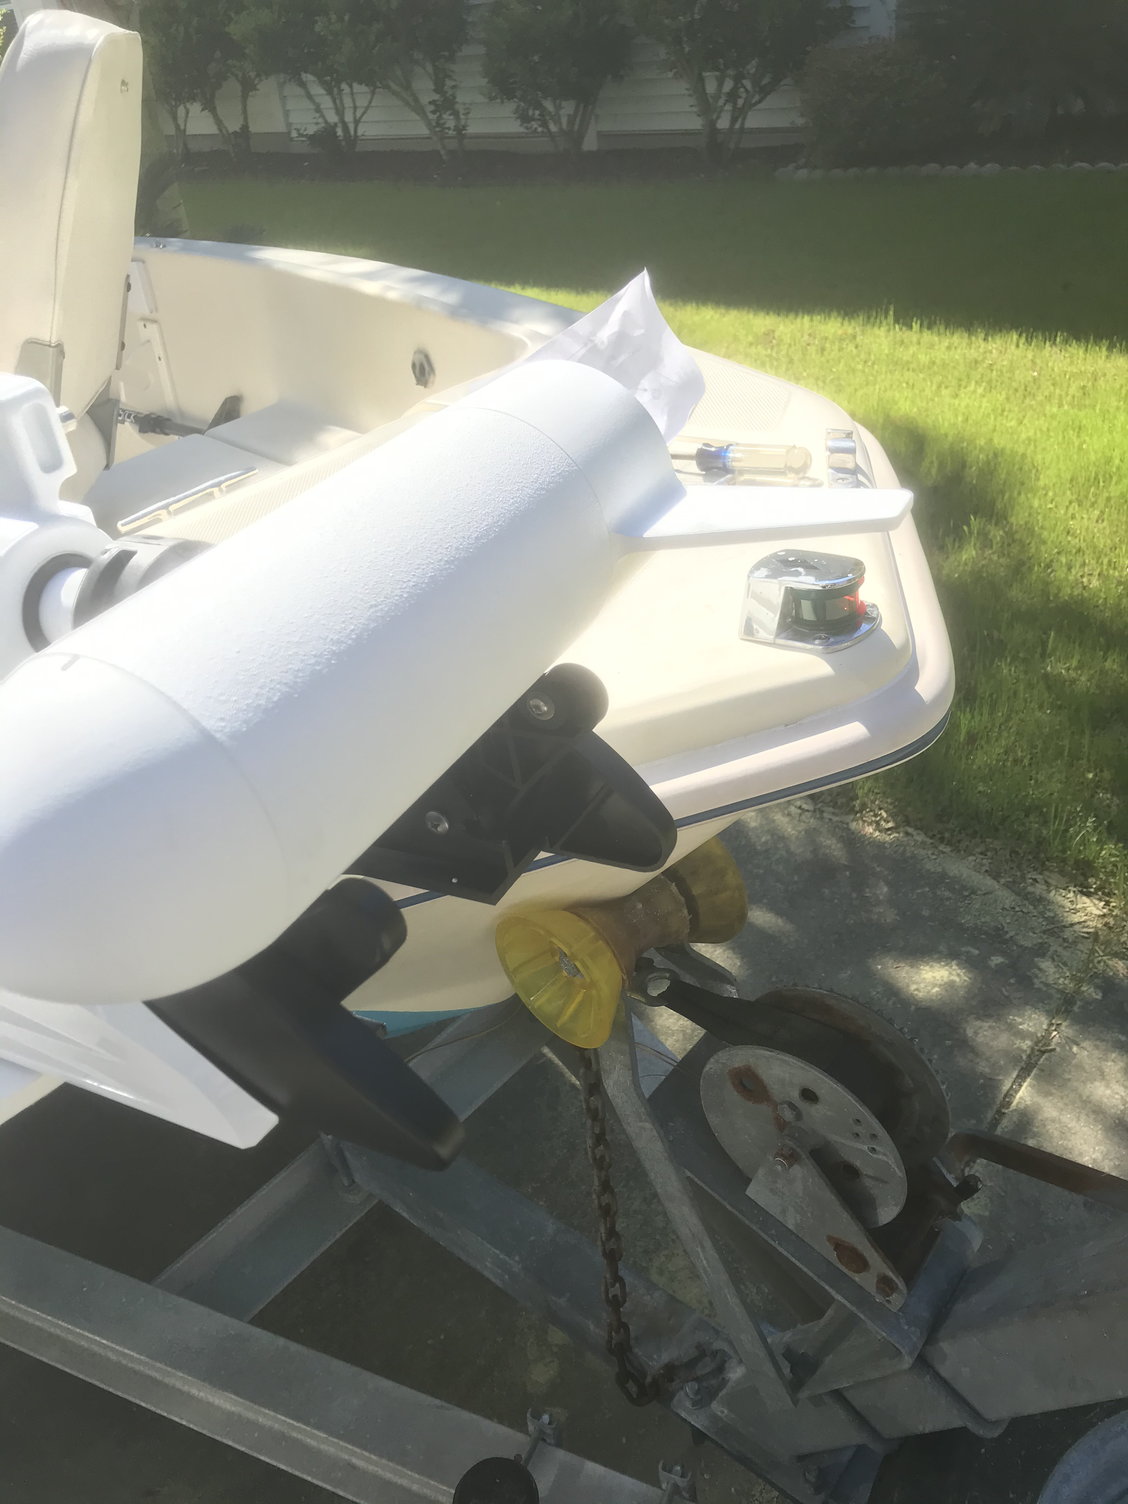 Choosing an unobtrusive trolling motor - The Hull Truth - Boating and  Fishing Forum